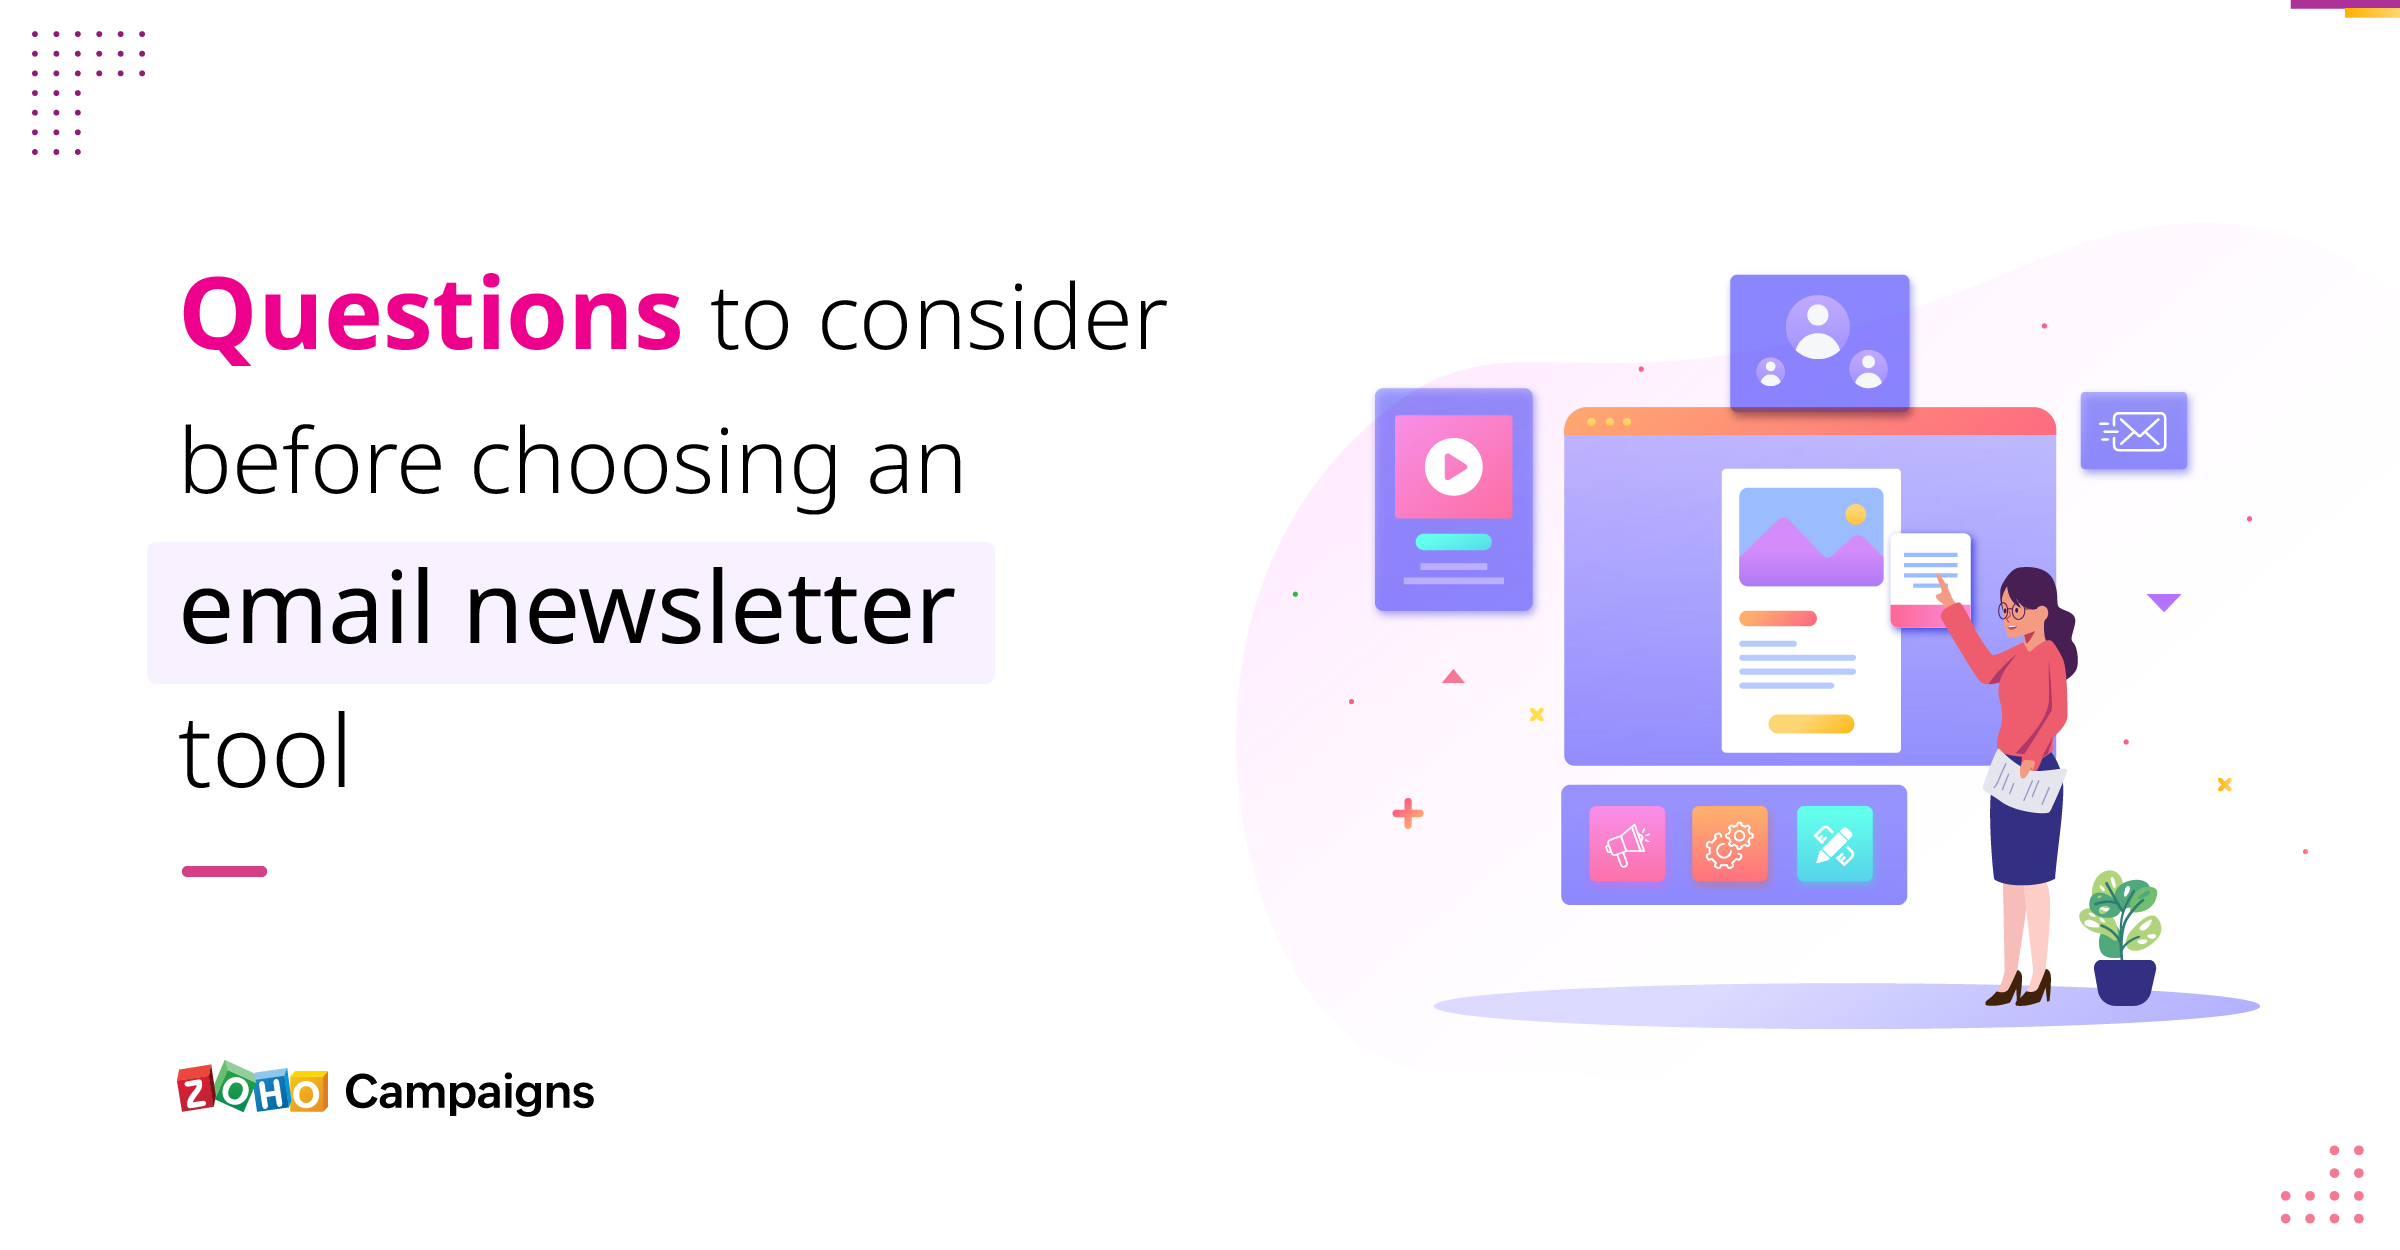 Questions to consider before choosing an email newsletter tool